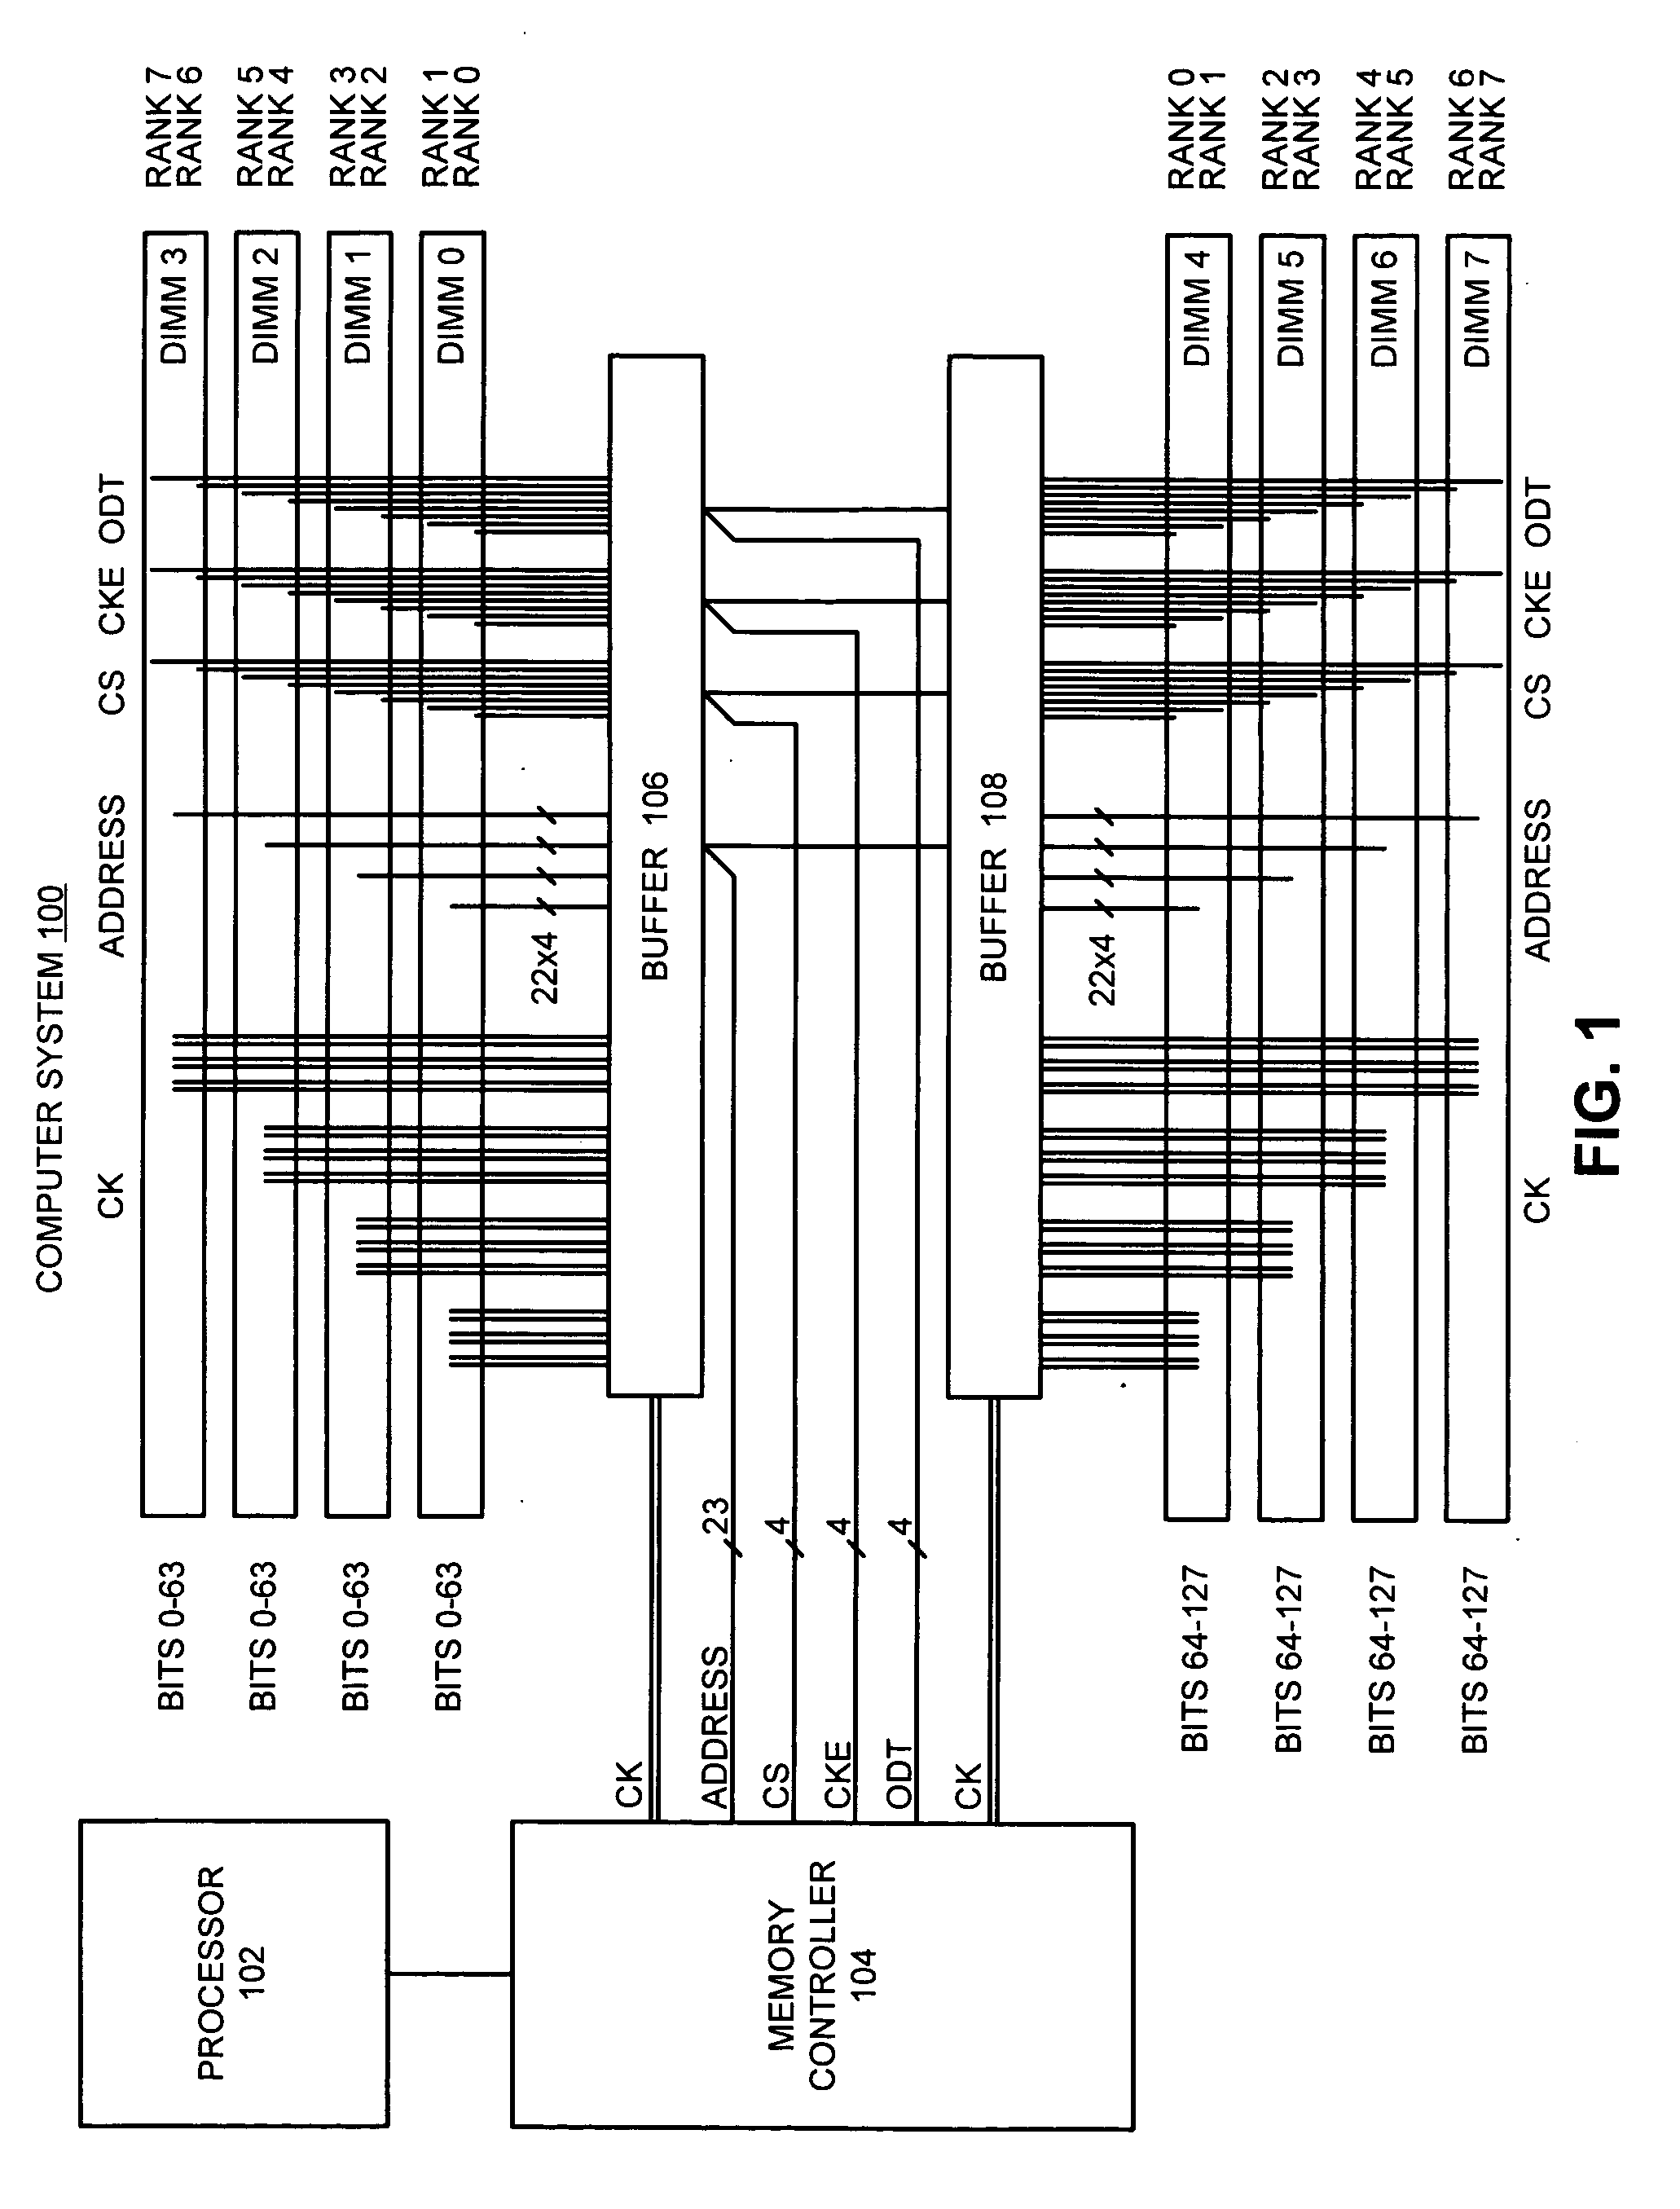 Reducing the number of power and ground pins required to drive address signals to memory modules